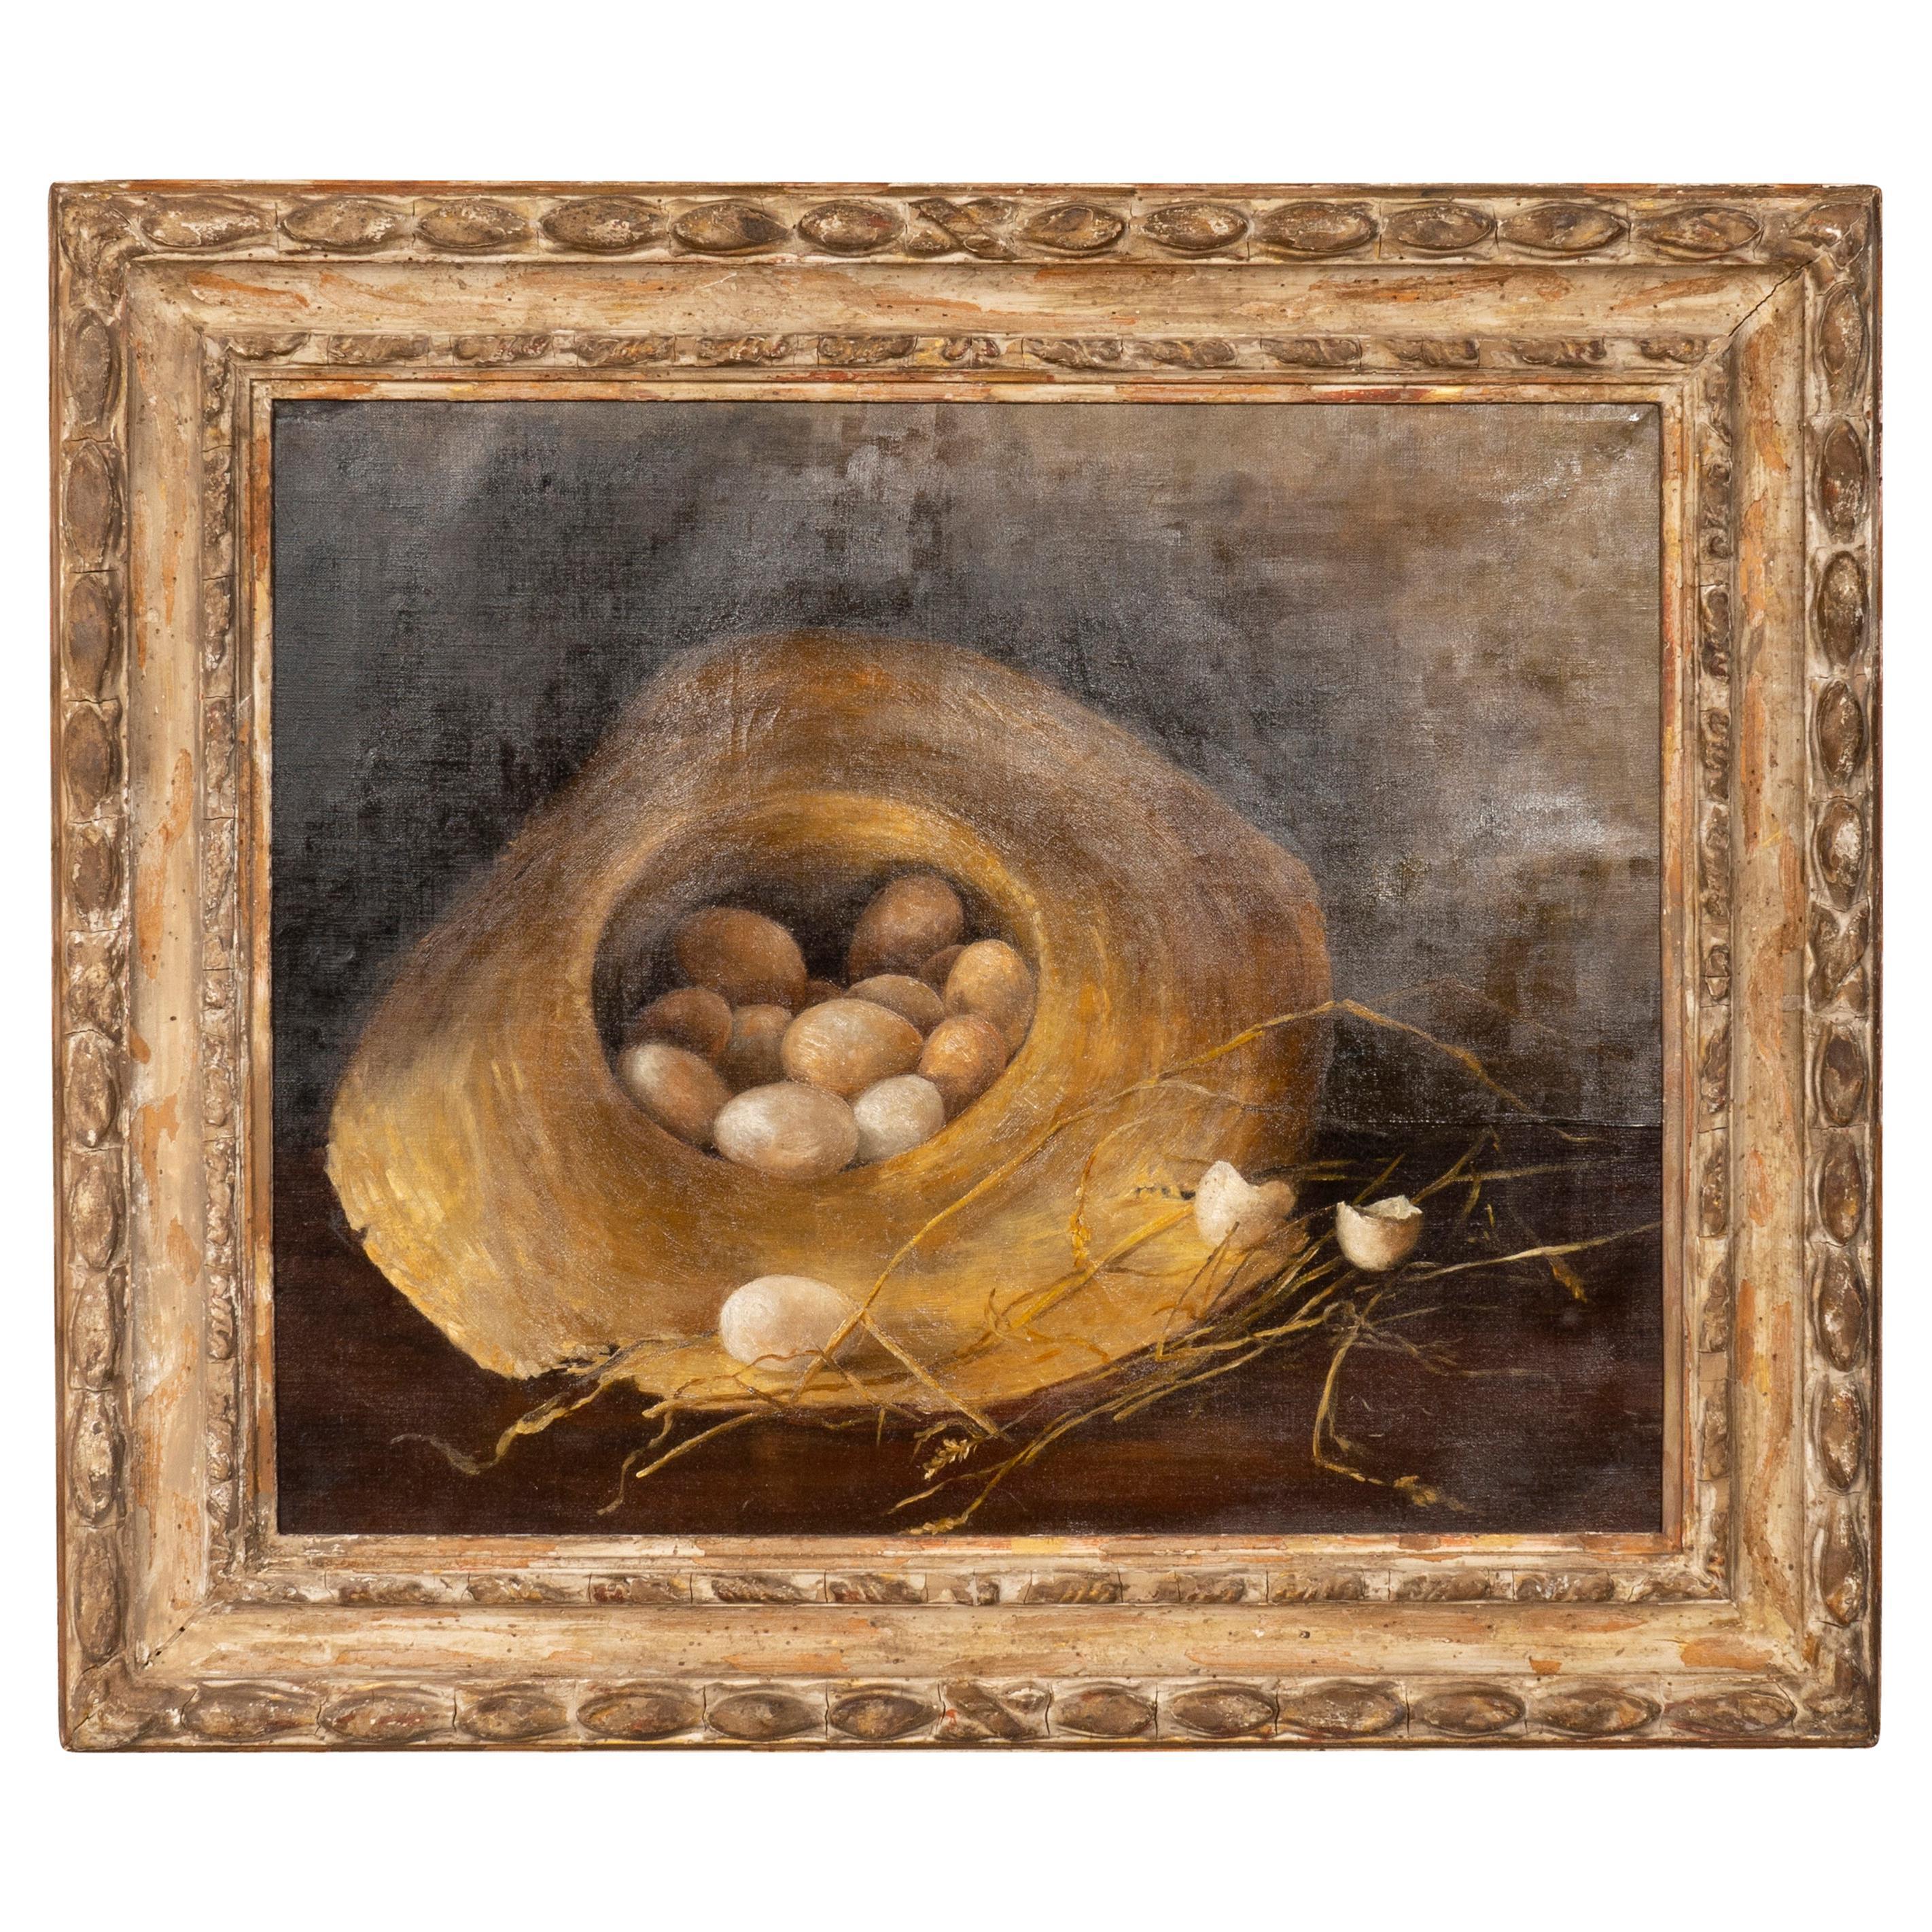  Framed Oil on Canvas "Eggs in a Straw Hat" For Sale